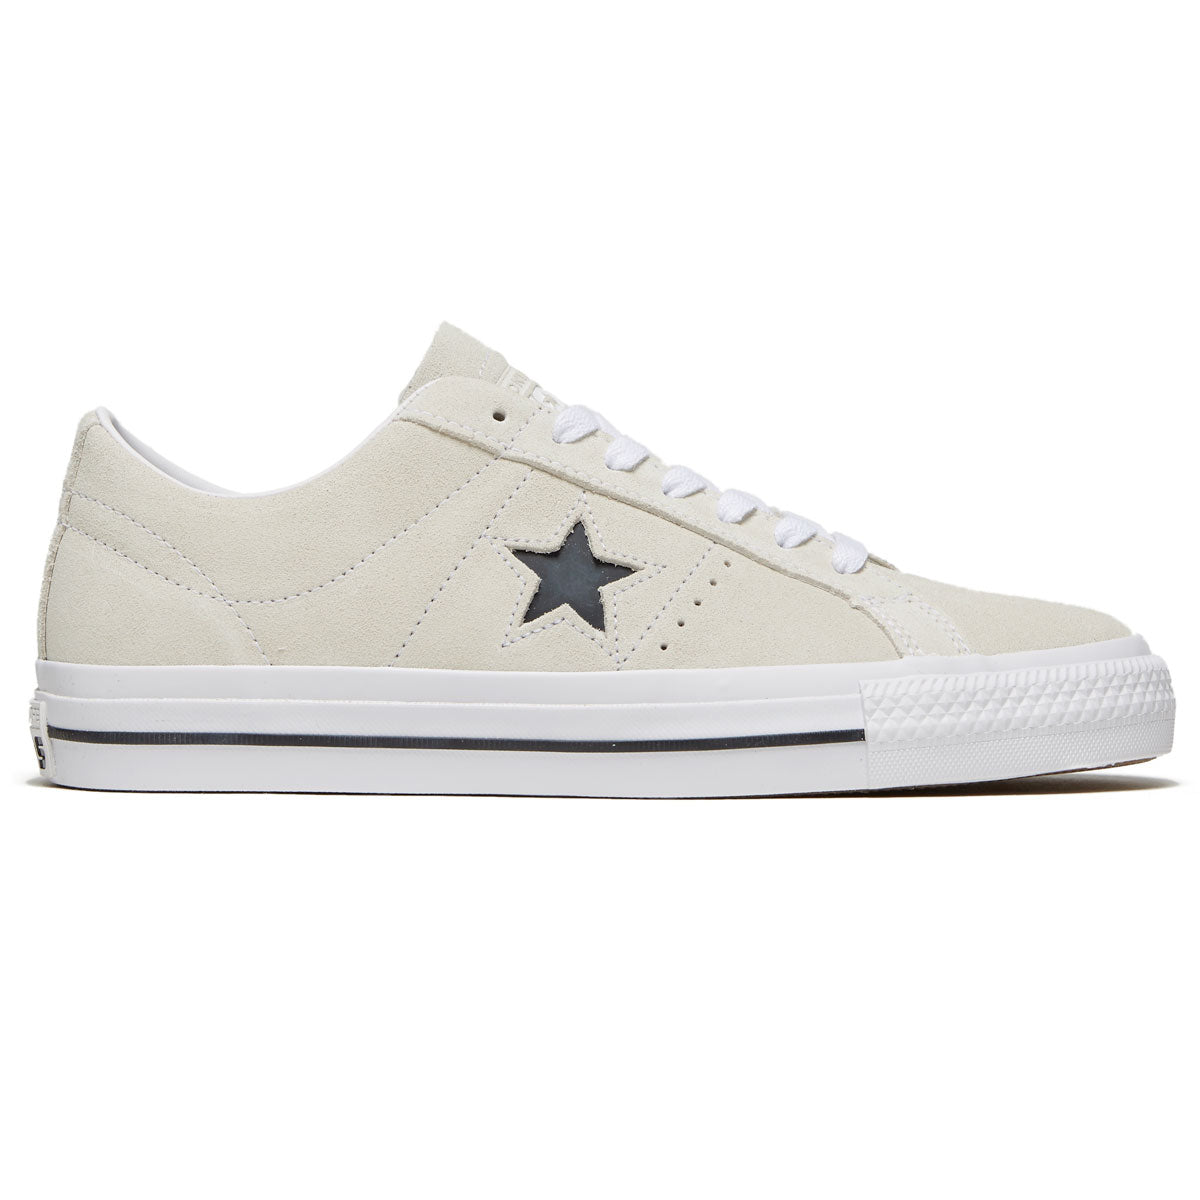 Converse One Star Pro Suede Shoes - Egret/White/Black image 1